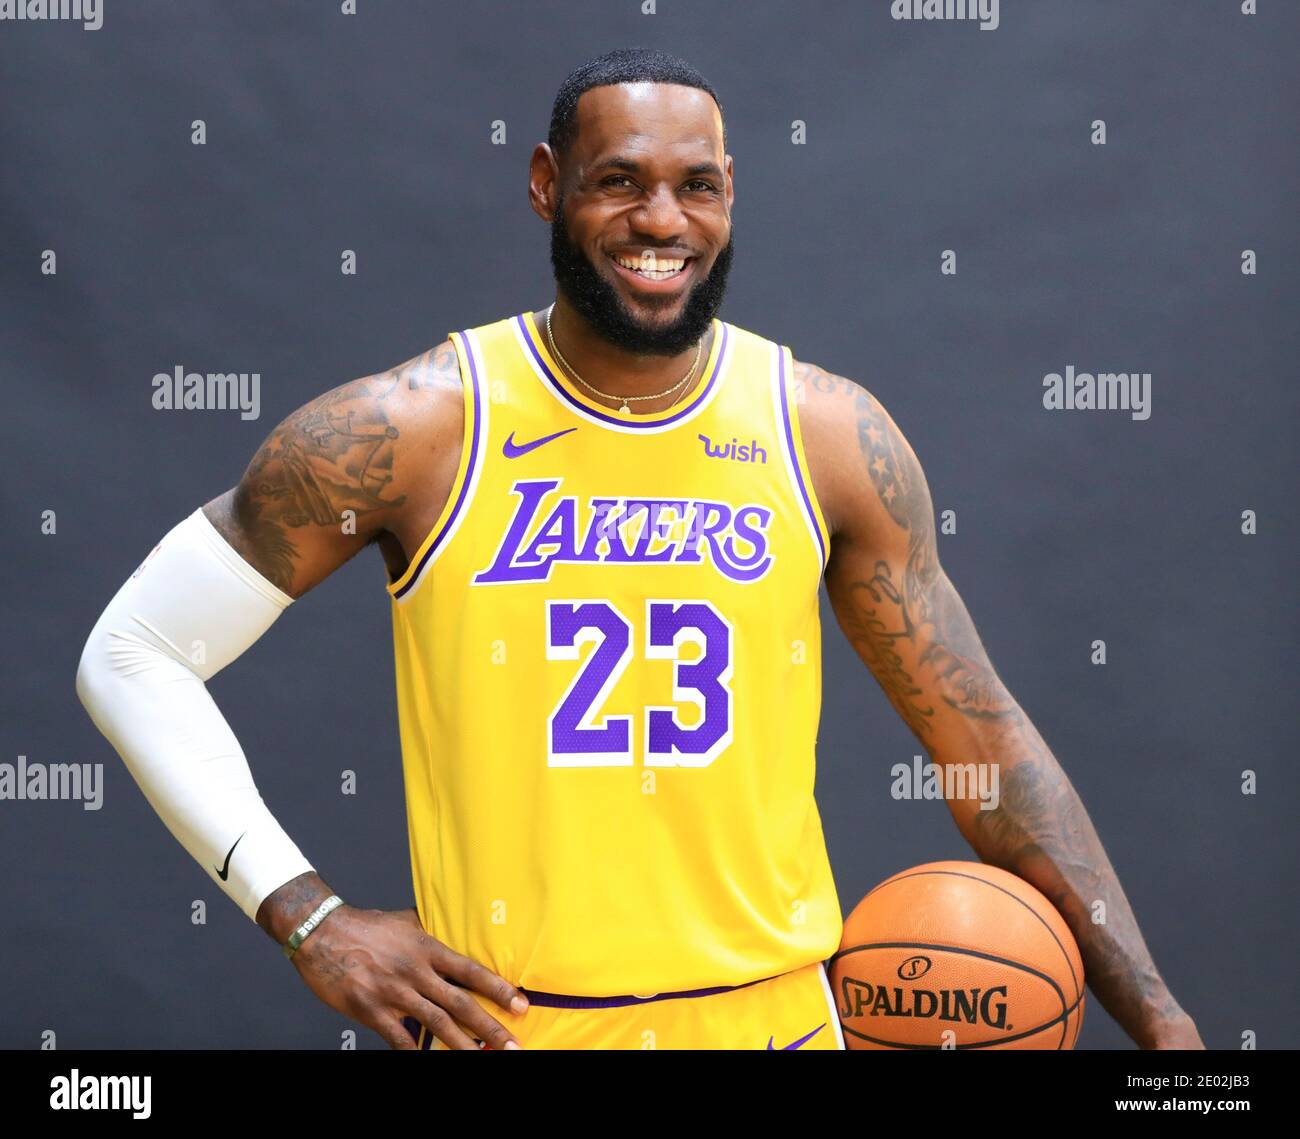 Beijing, USA. 27th Sep, 2019. Lebron James of Los Angeles Lakers poses for a picture during media day in Los Angeles, the United States, Sept. 27, 2019. The 36-year-old James led the Los Angles Lakers to win the NBA 2019-20 season with an average of 29.8 points, 11.8 rebounds, and 8.5 assists in the finals, crowned his fourth NBA finals MVP. Credit: Li Ying/Xinhua/Alamy Live News Stock Photo